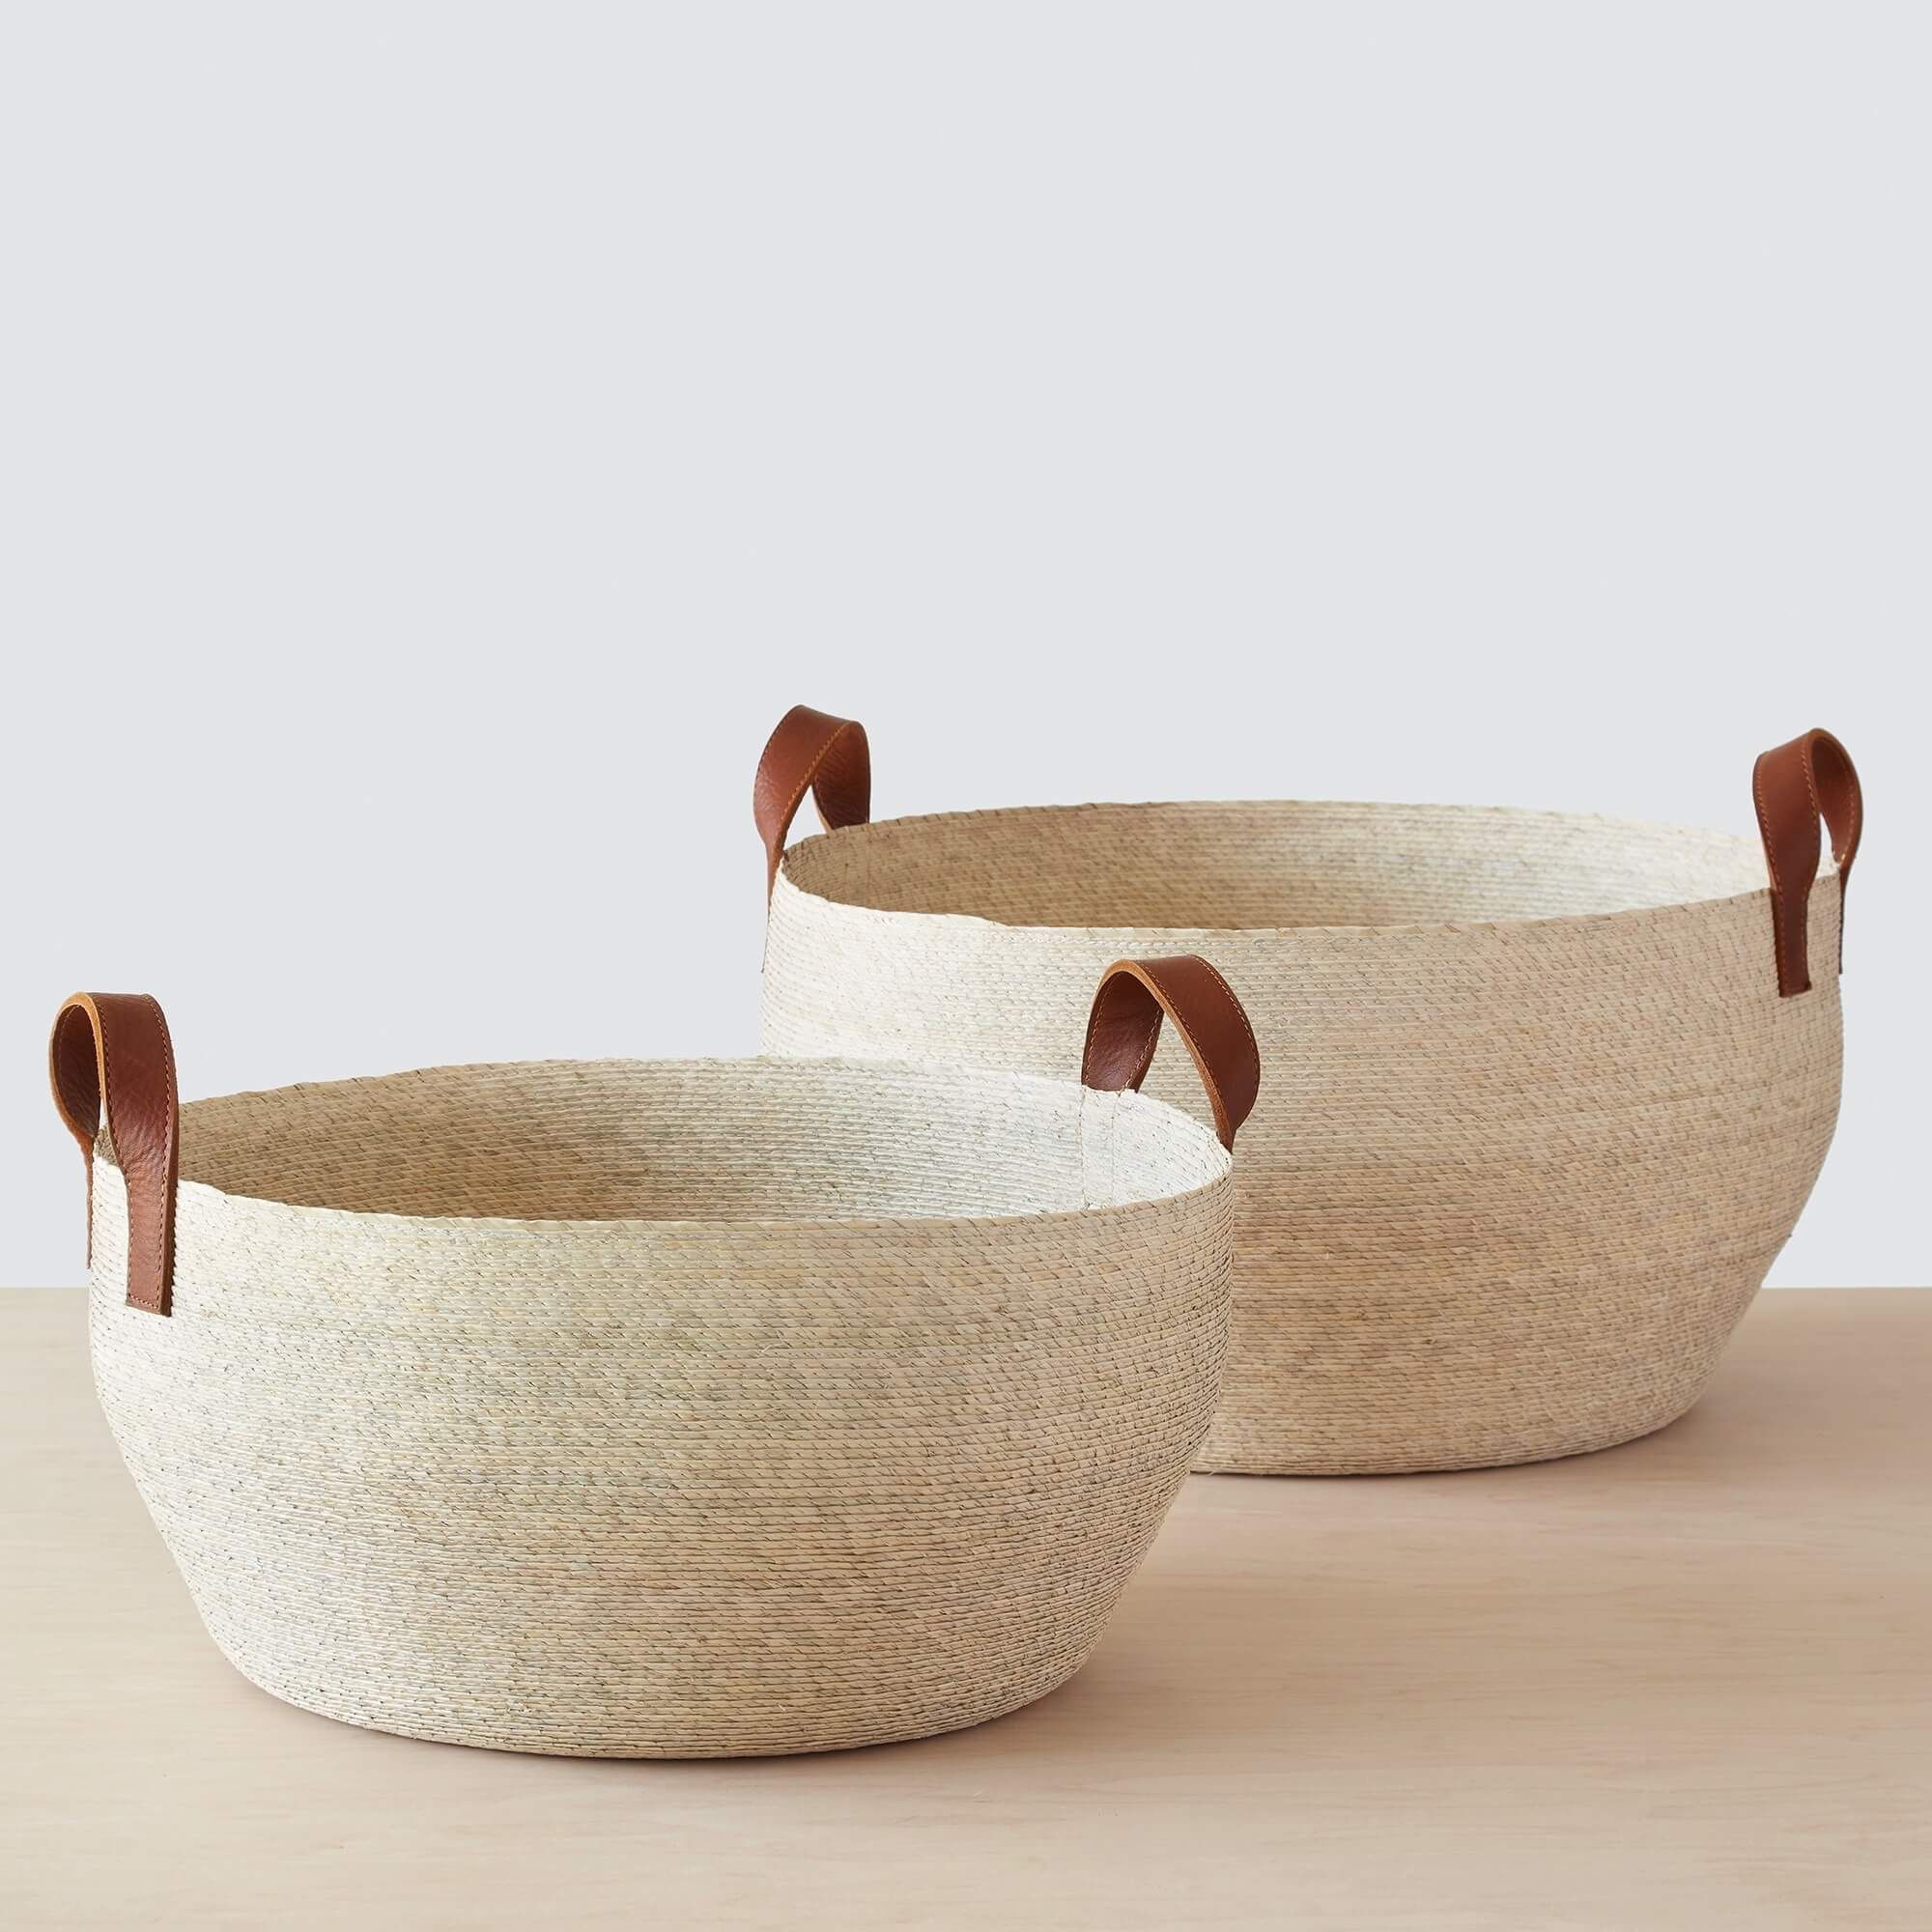 Mercado Woven Floor Baskets | Handcrafted with Palm Leaves   – The Citizenry | The Citizenry